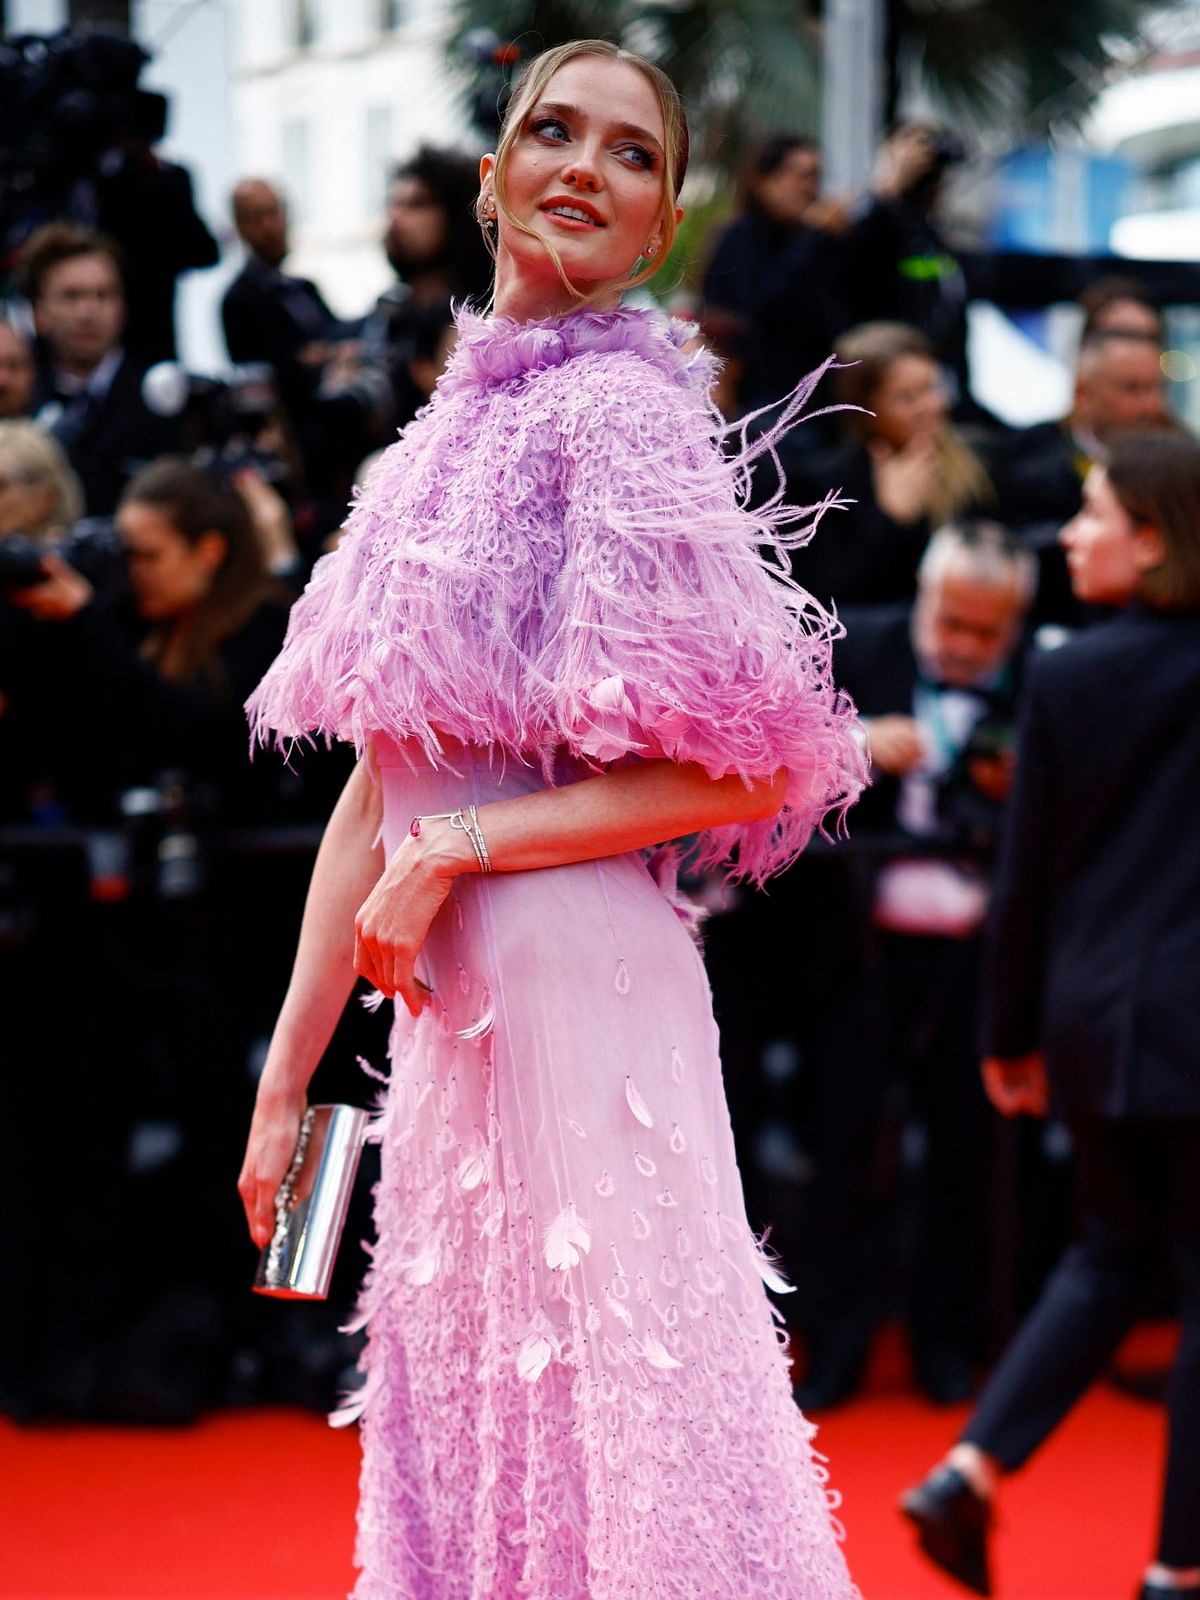 Vlada Rosljakova walked the red carpet in a lavender gown at the Cannes Film Festival.